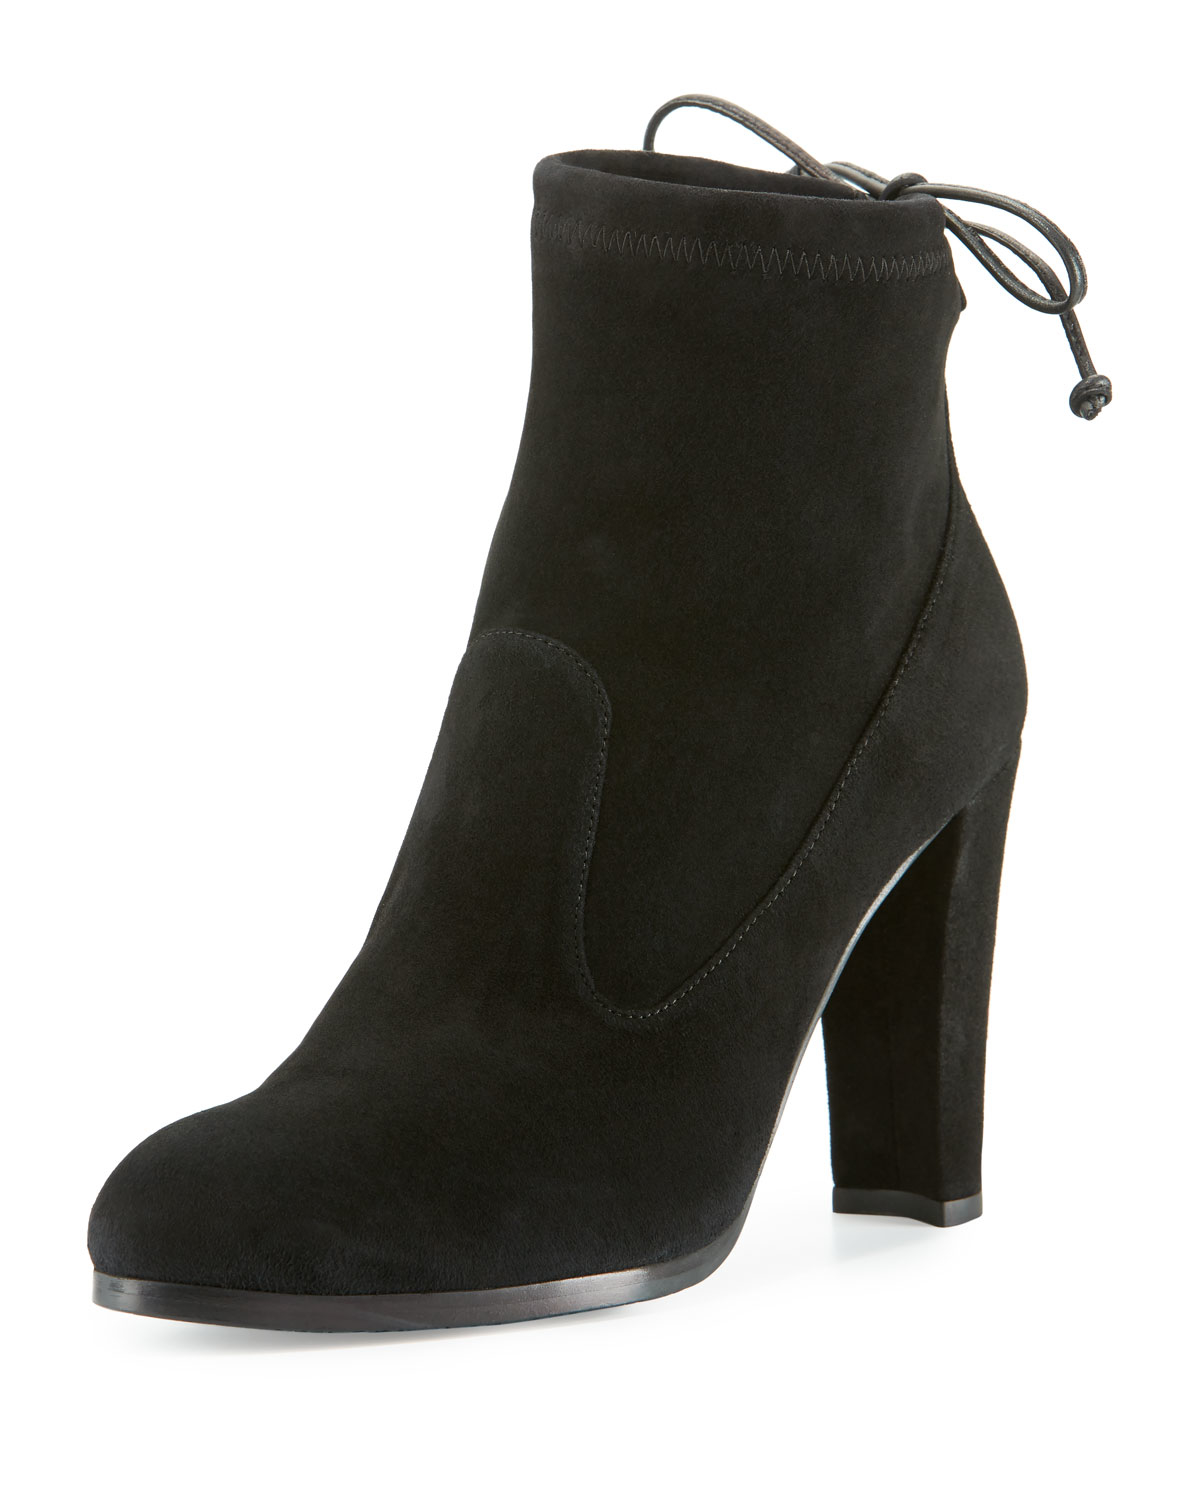 Stuart weitzman Catch Suede Bootie With Ankle Tie in Black - Save 21% ...